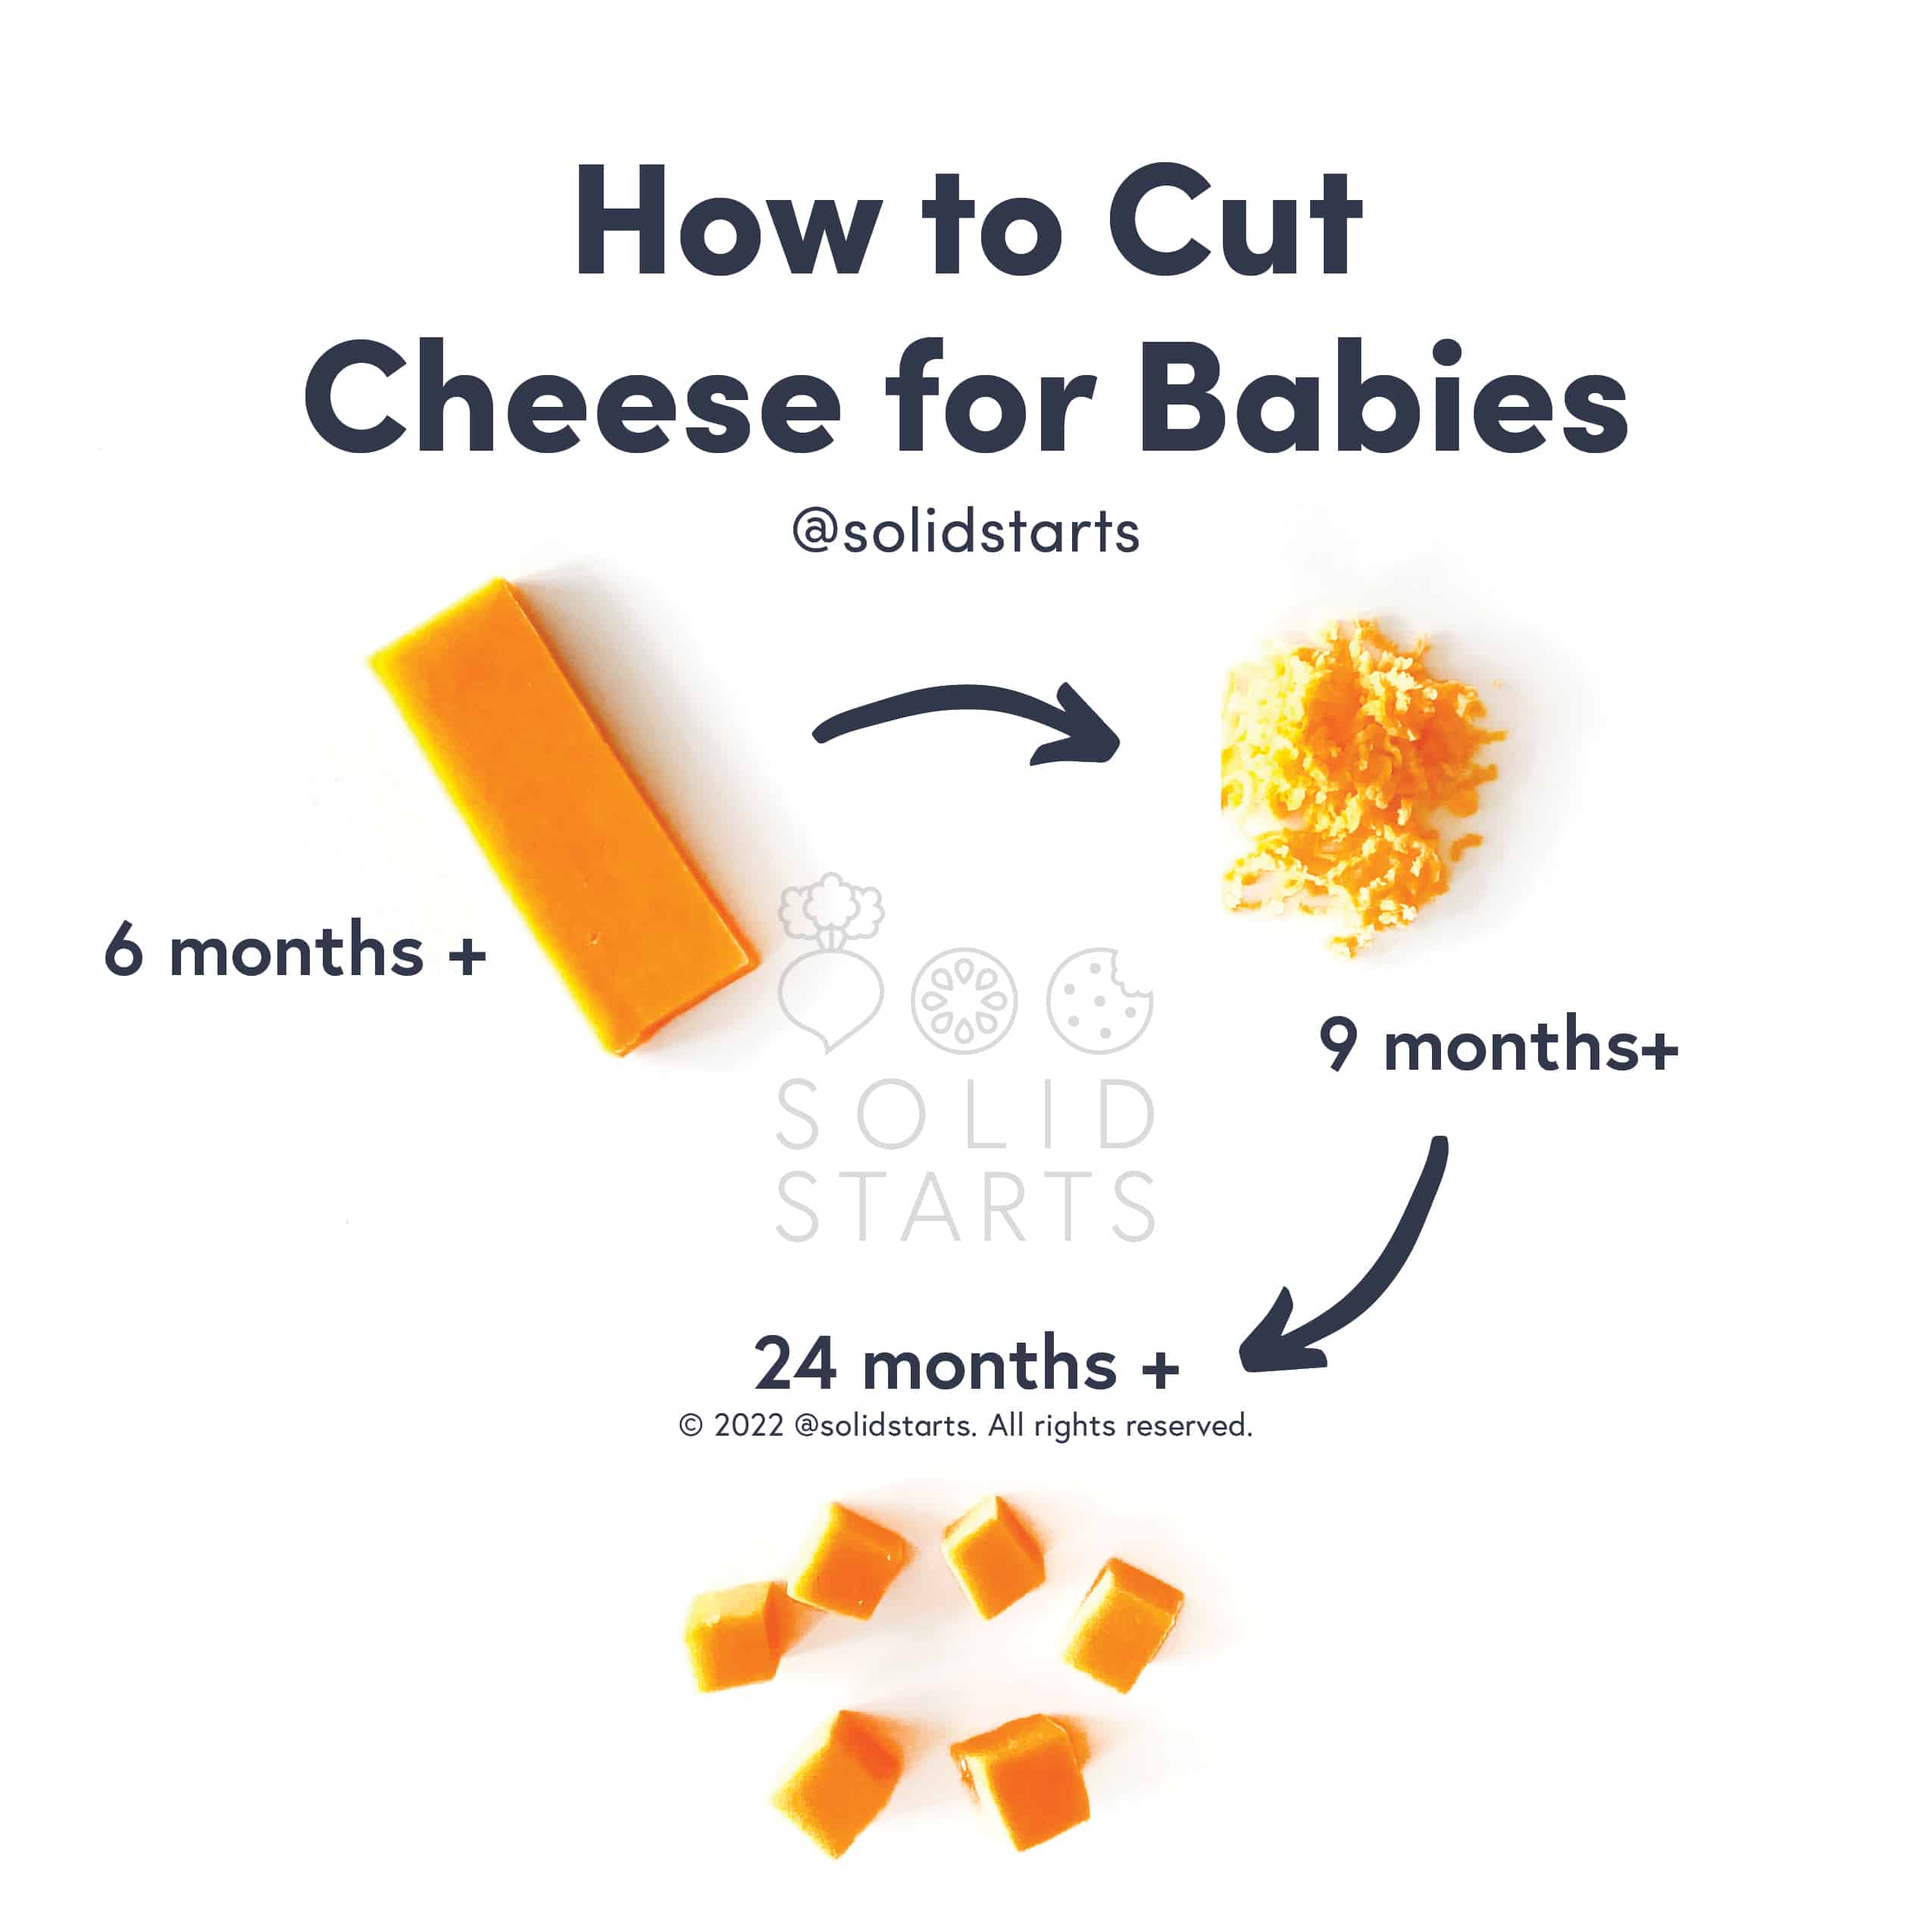 How to Cut Cheese for Babies